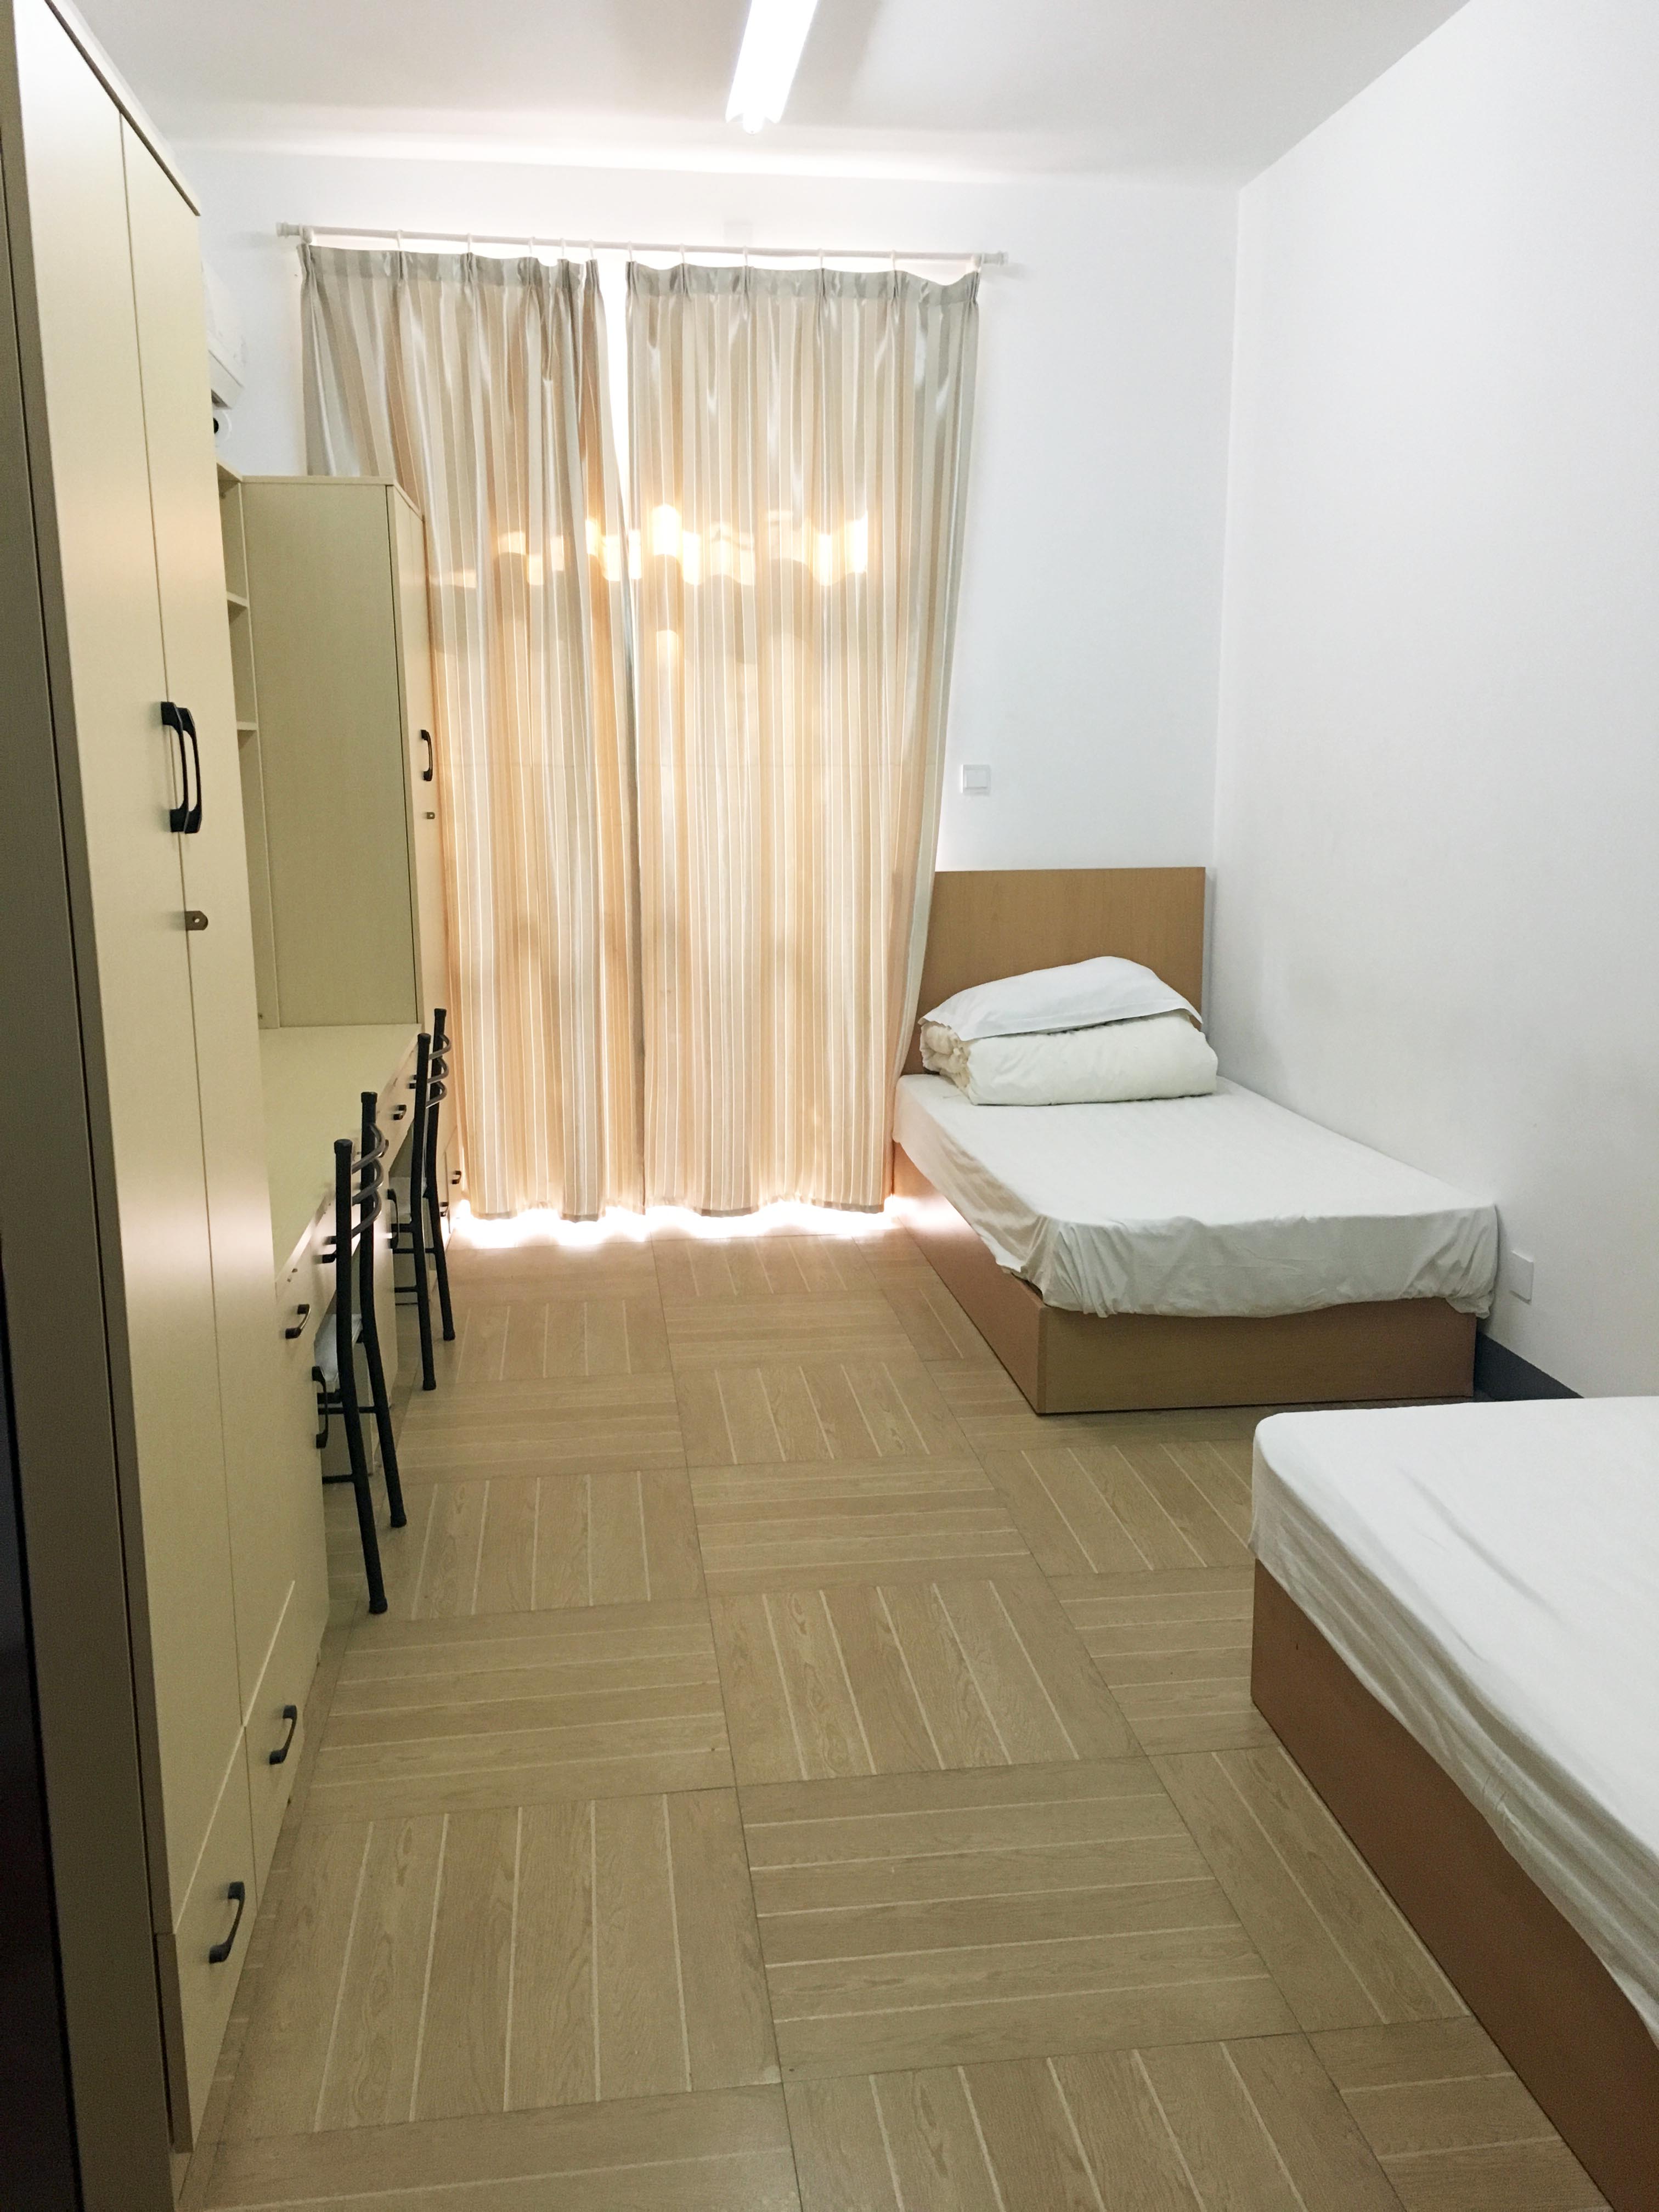 Shared bedroom in student residence hall in Shanghai, China.